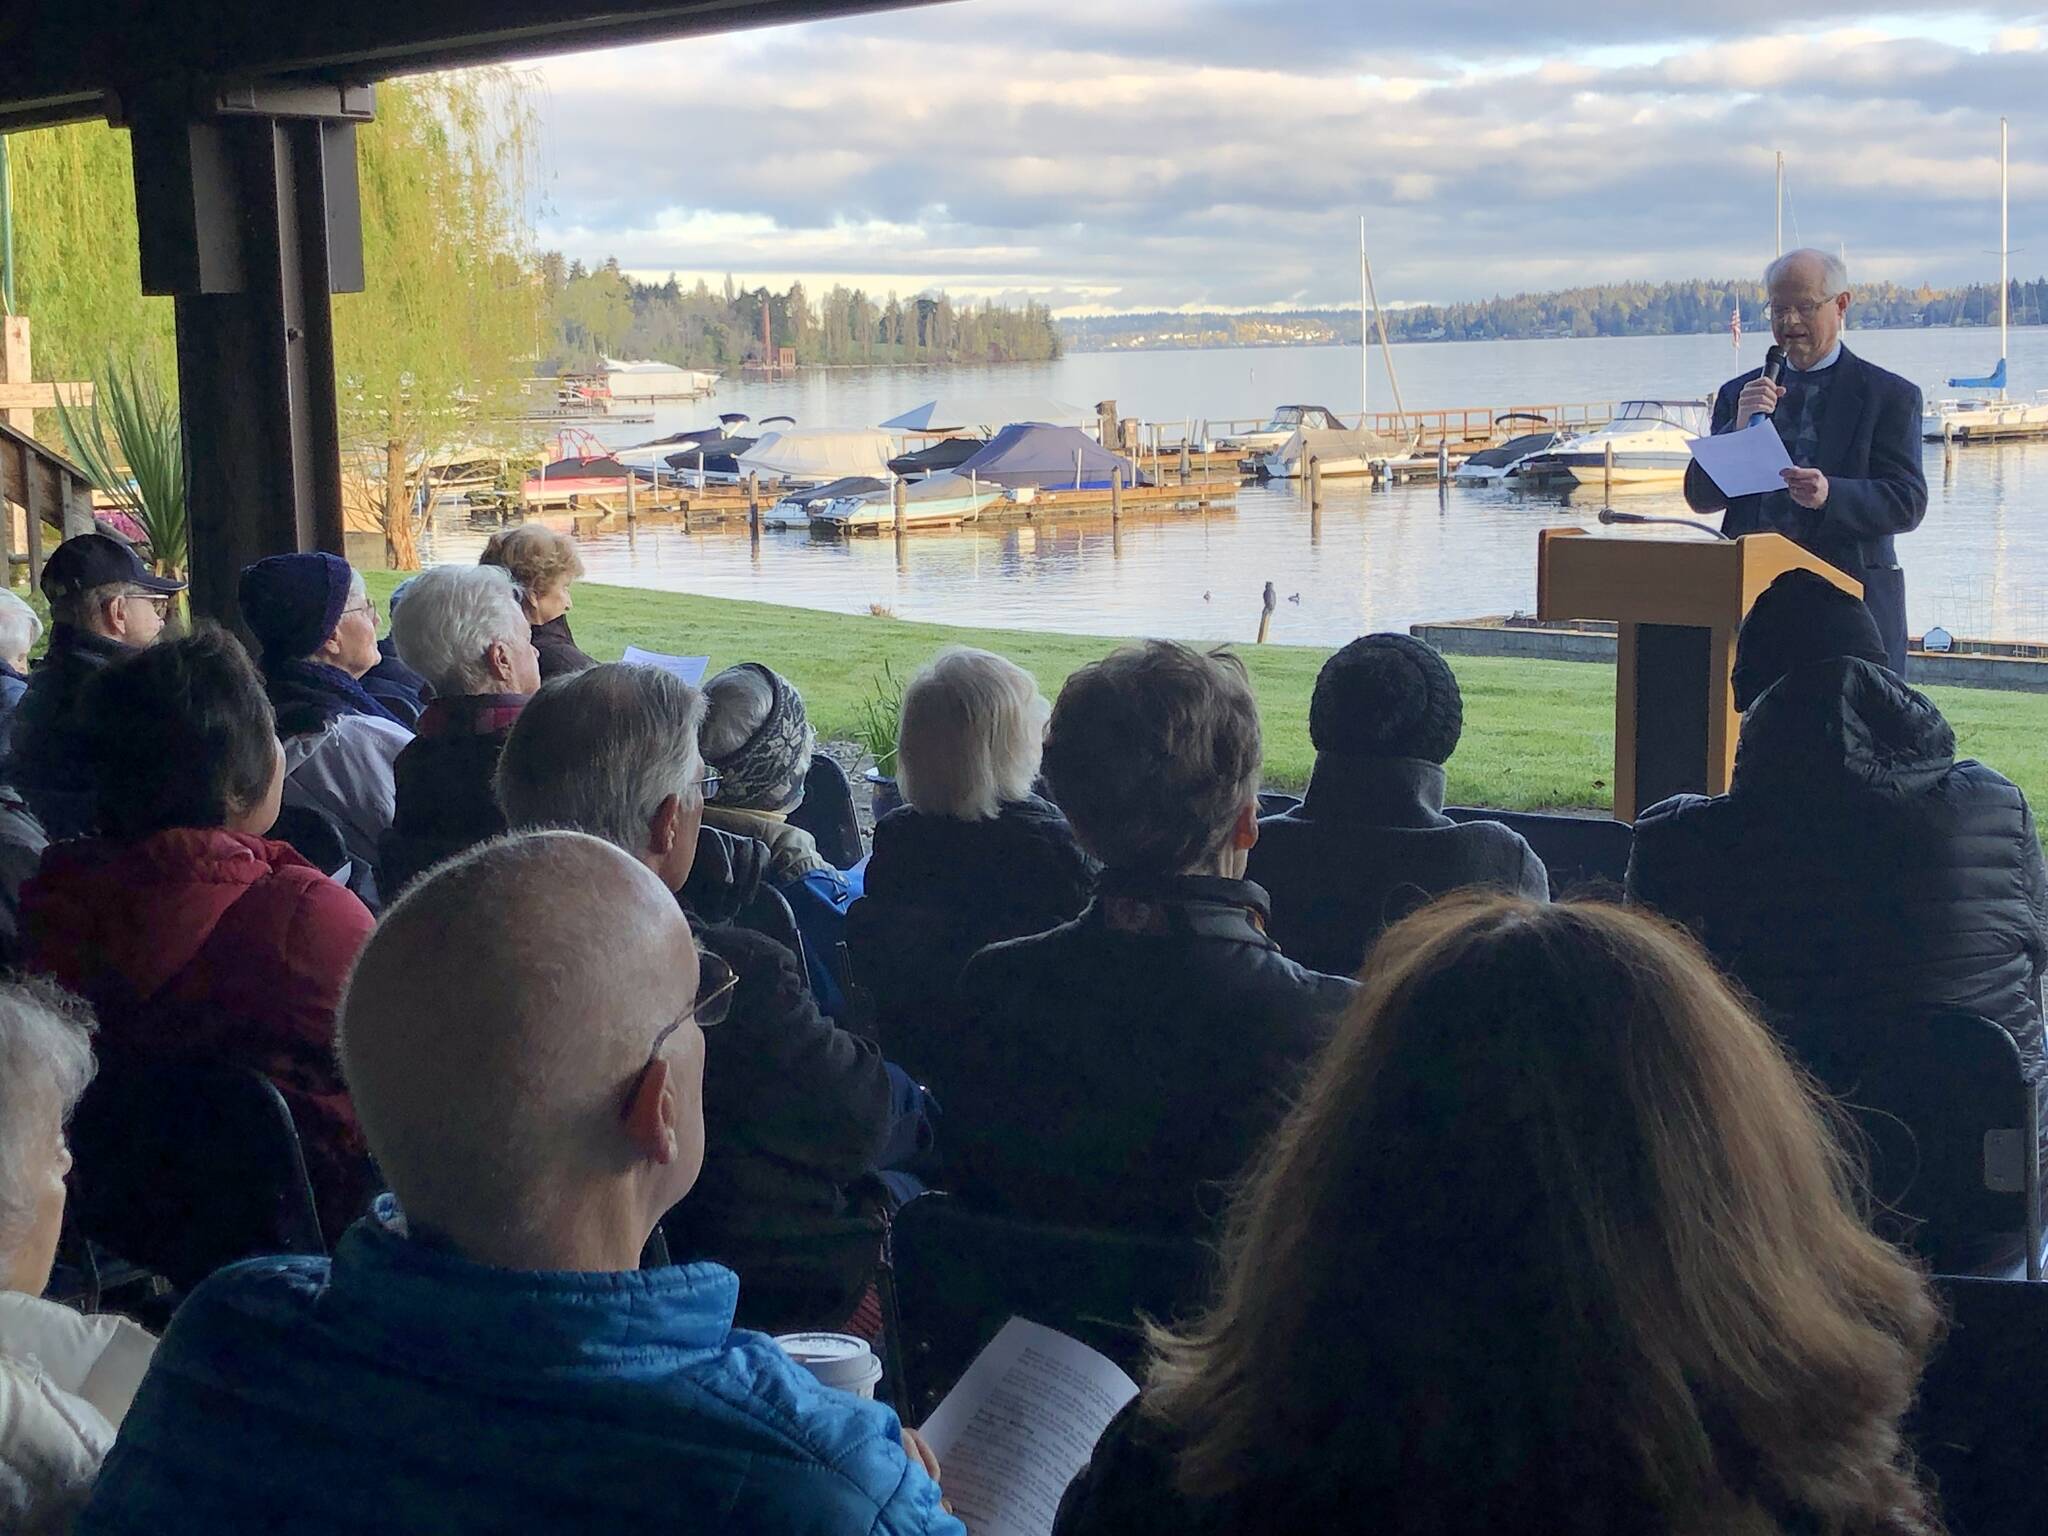 Some 50 residents at Mercer Island’s Covenant Living at the Shores braved the early morning cold to attend the annual sunrise service lakeside on Easter. The guest preacher was Rev. Richard Gronhovd, retired Presbyterian pastor who recently moved to the campus. The service was officiated by Rev. Greg Asimakoupoulos, who begins his 10th year as chaplain this week. Courtesy of Greg Asimakoupoulos